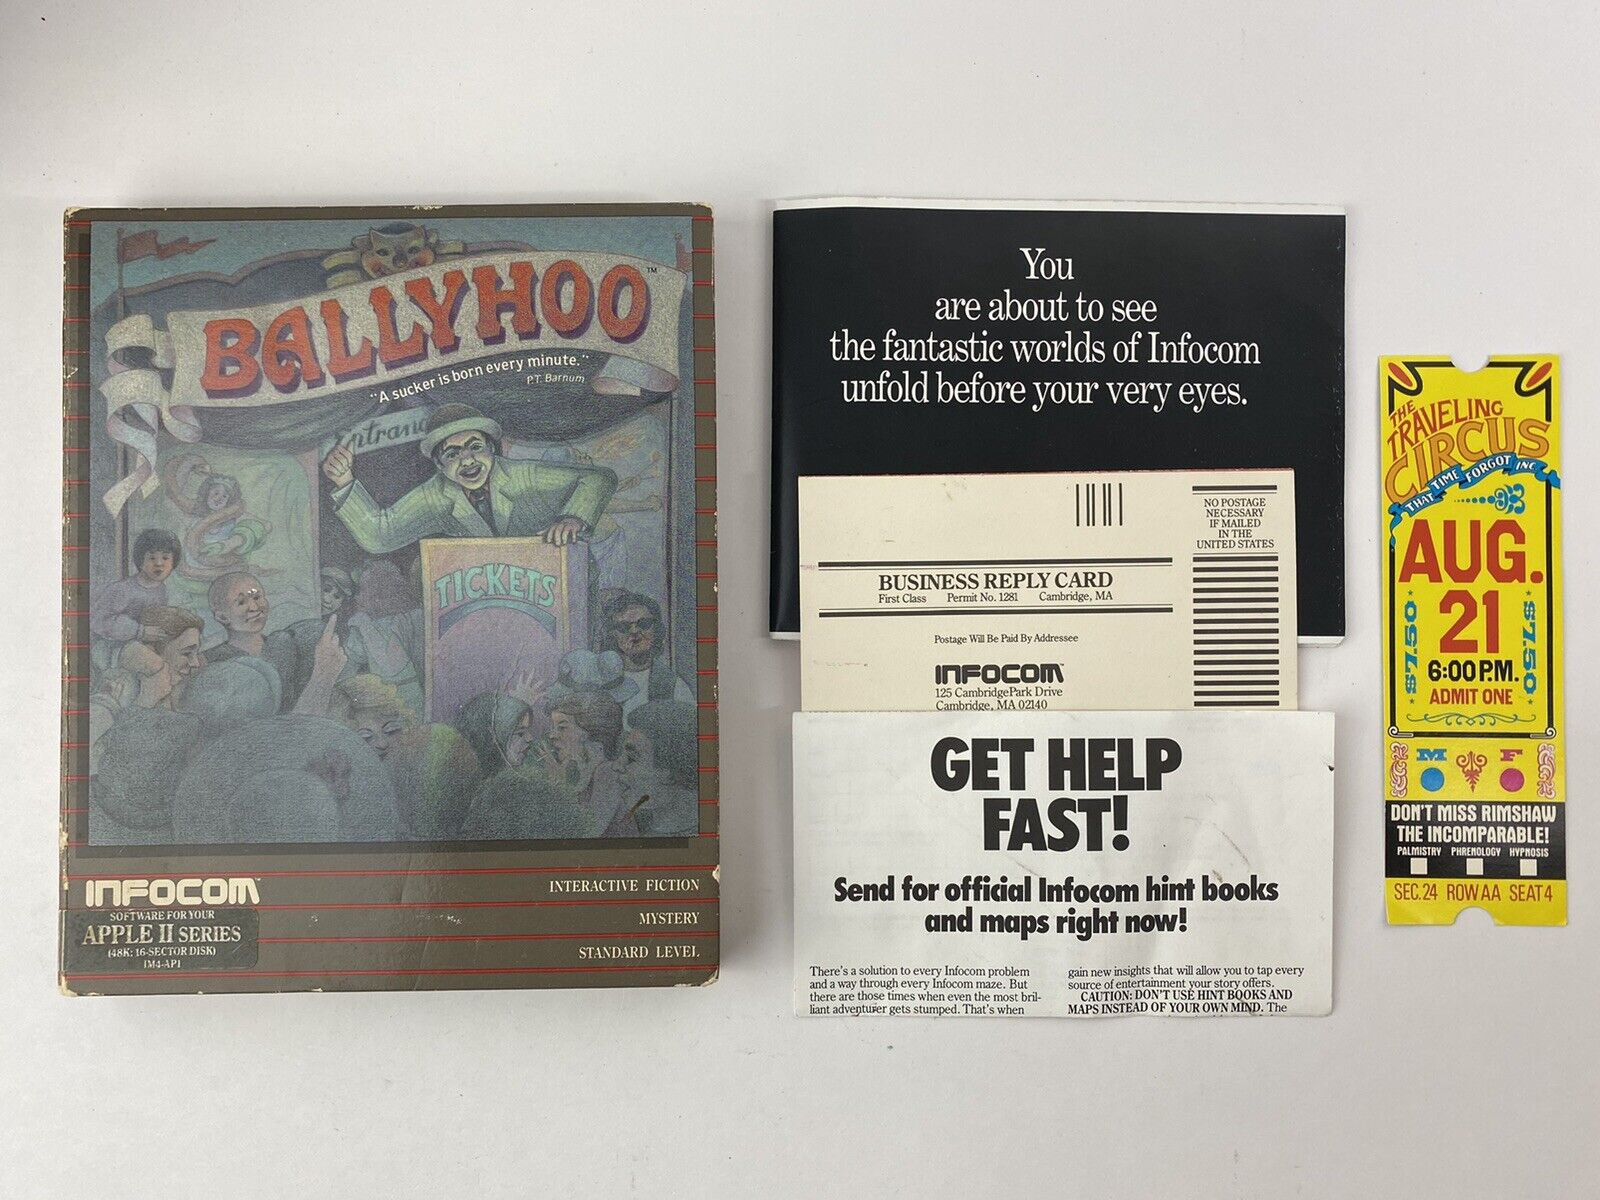 Infocom Ballyhoo Apple II Series Computer Game Box and Inserts Only No Game Disk